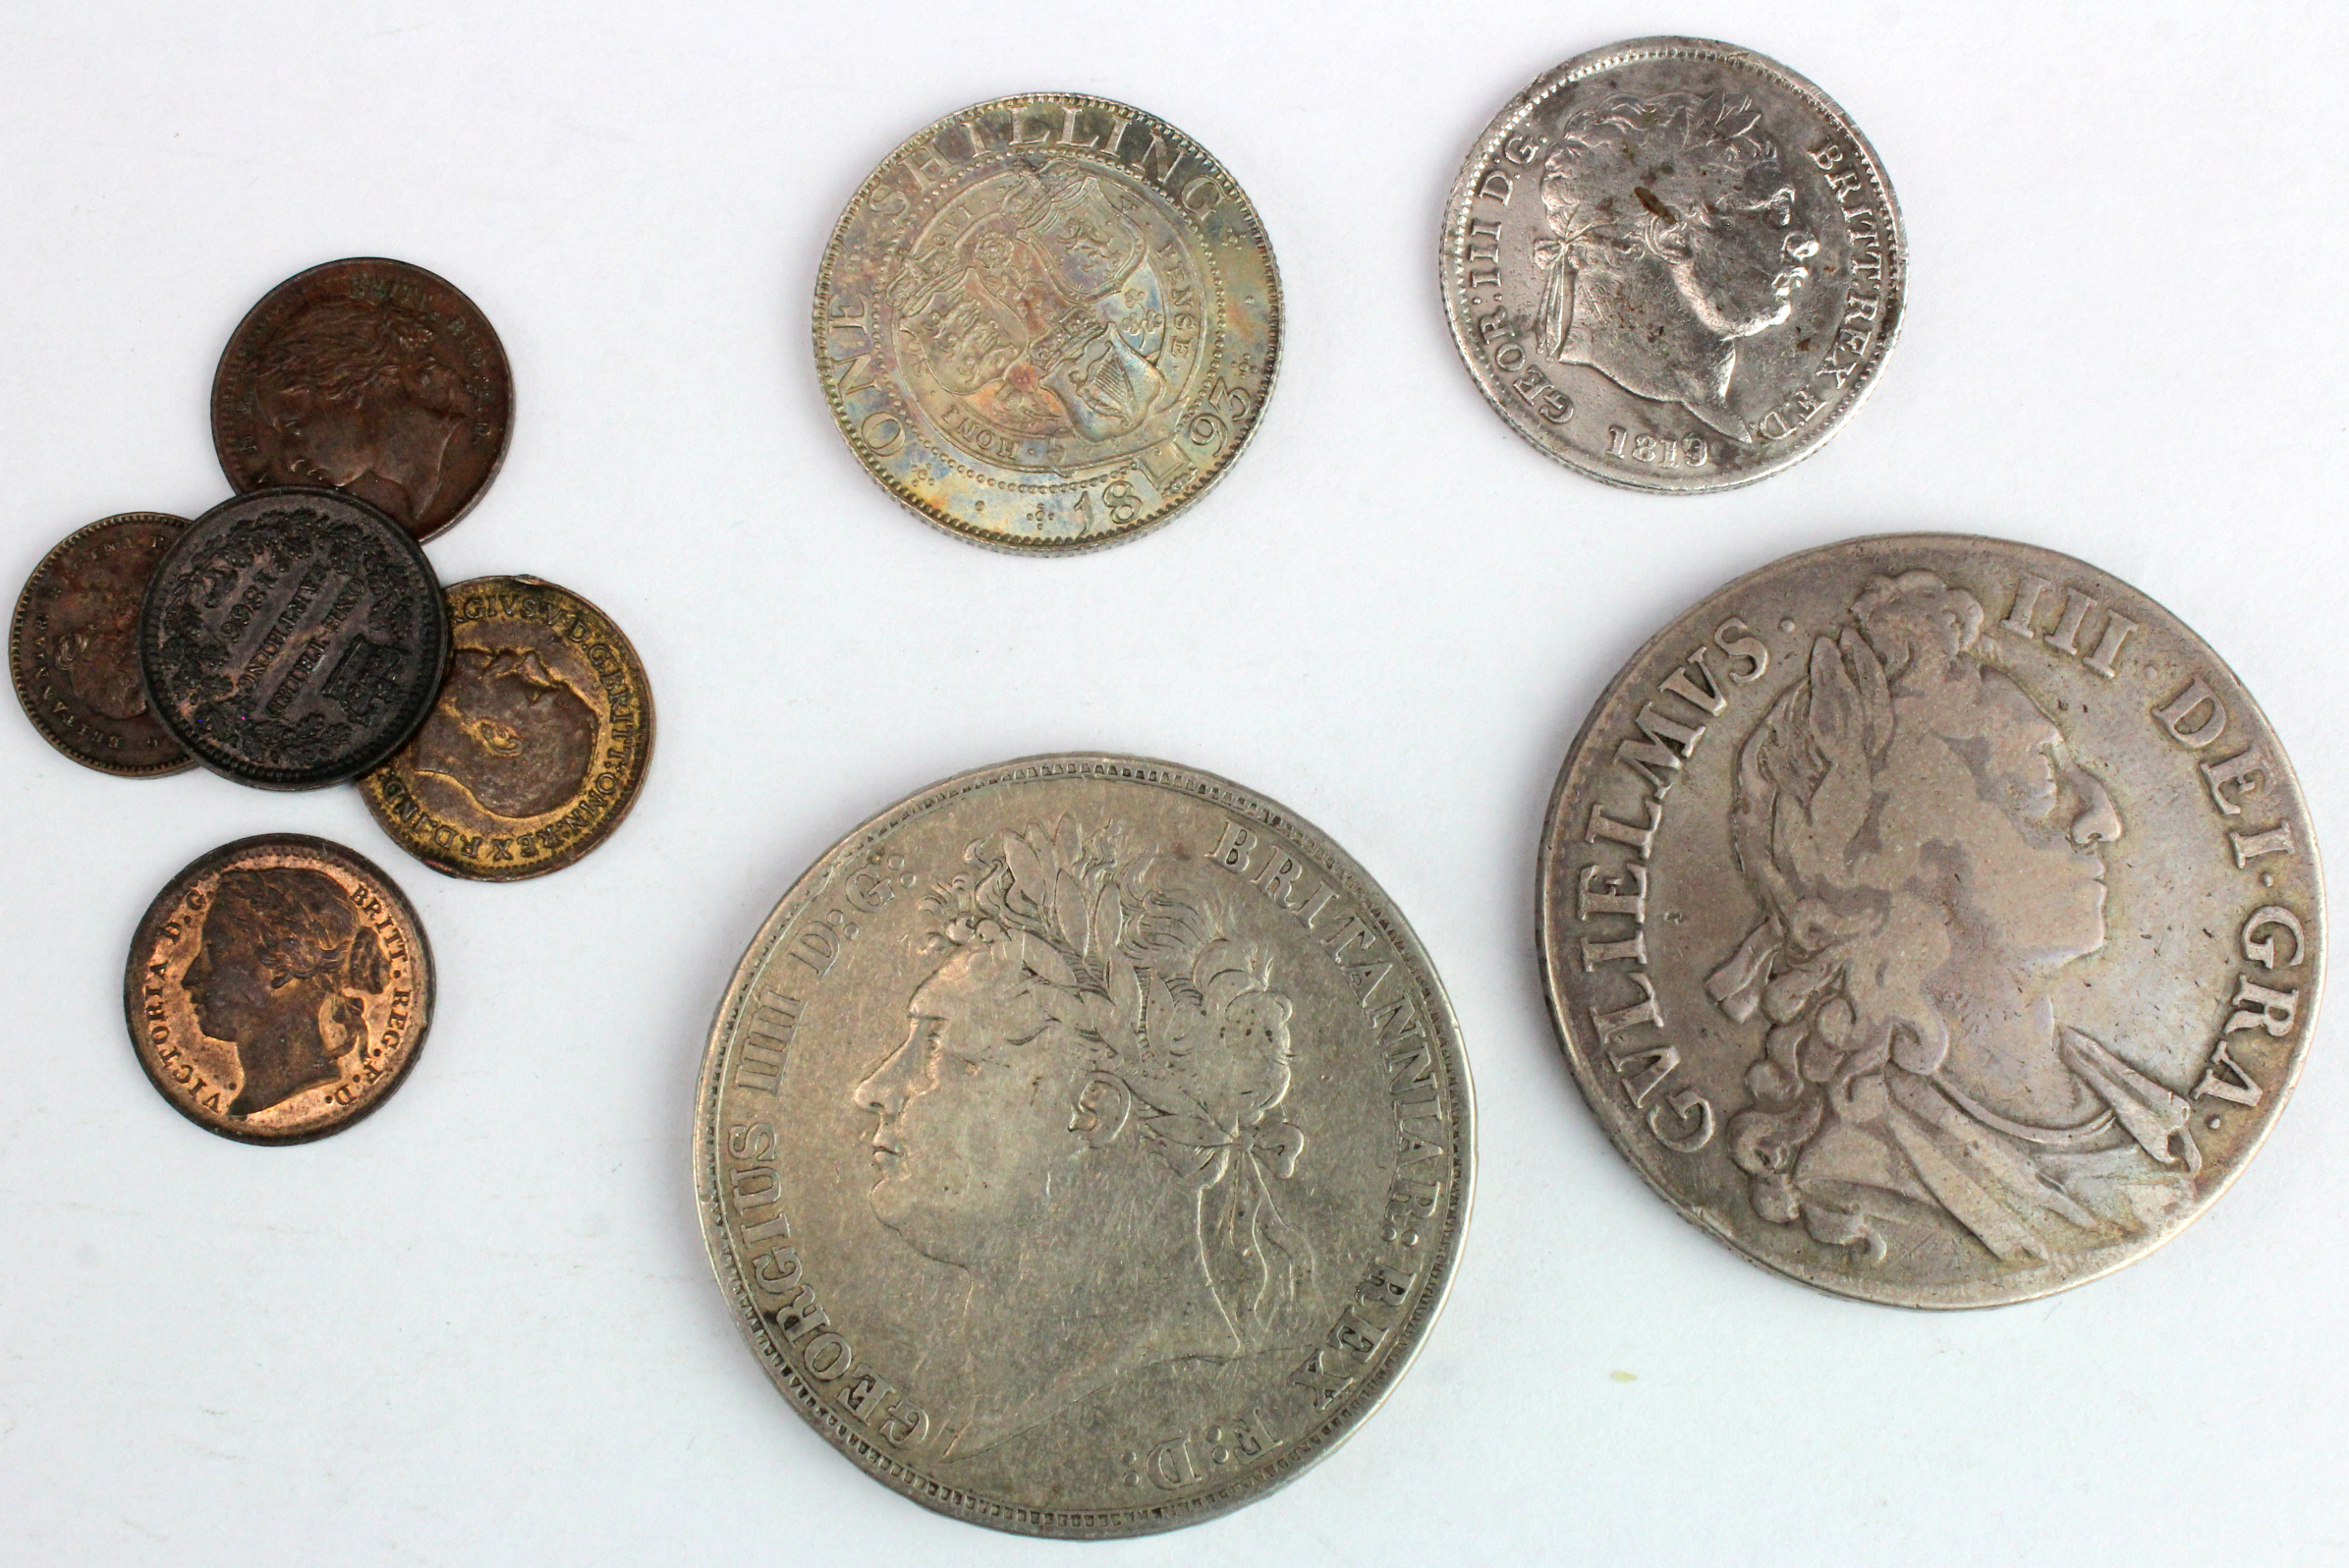 GB Coins (9): Crown 1695 Octavo VG, Crown 1821 Secundo nF, Shilling 1819/8 Fair, Shilling 1893